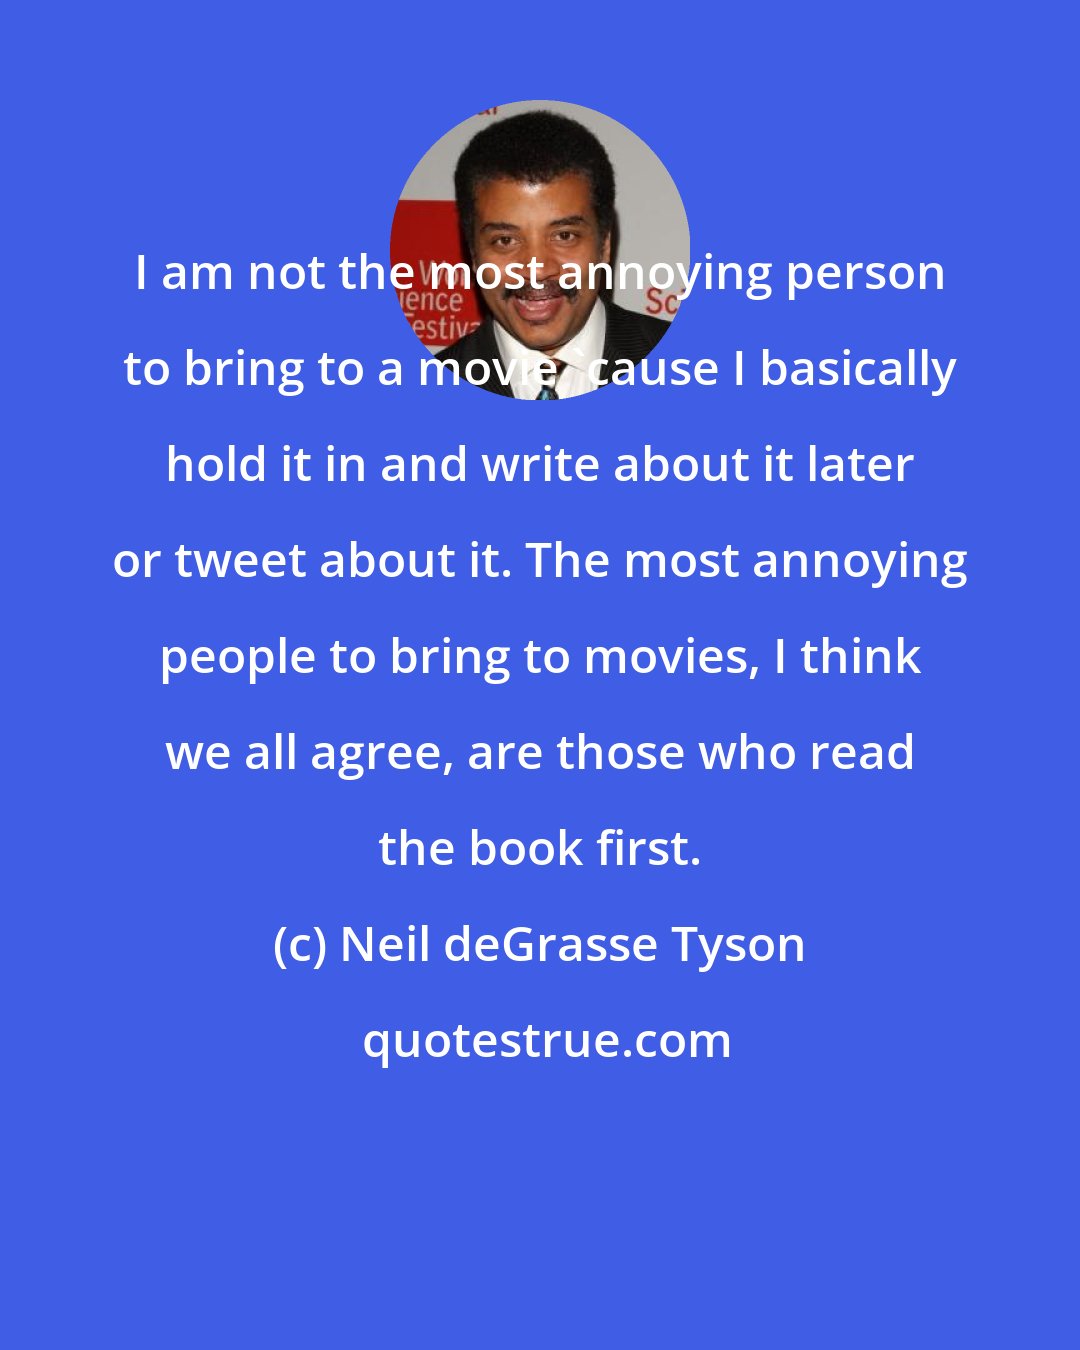 Neil deGrasse Tyson: I am not the most annoying person to bring to a movie 'cause I basically hold it in and write about it later or tweet about it. The most annoying people to bring to movies, I think we all agree, are those who read the book first.